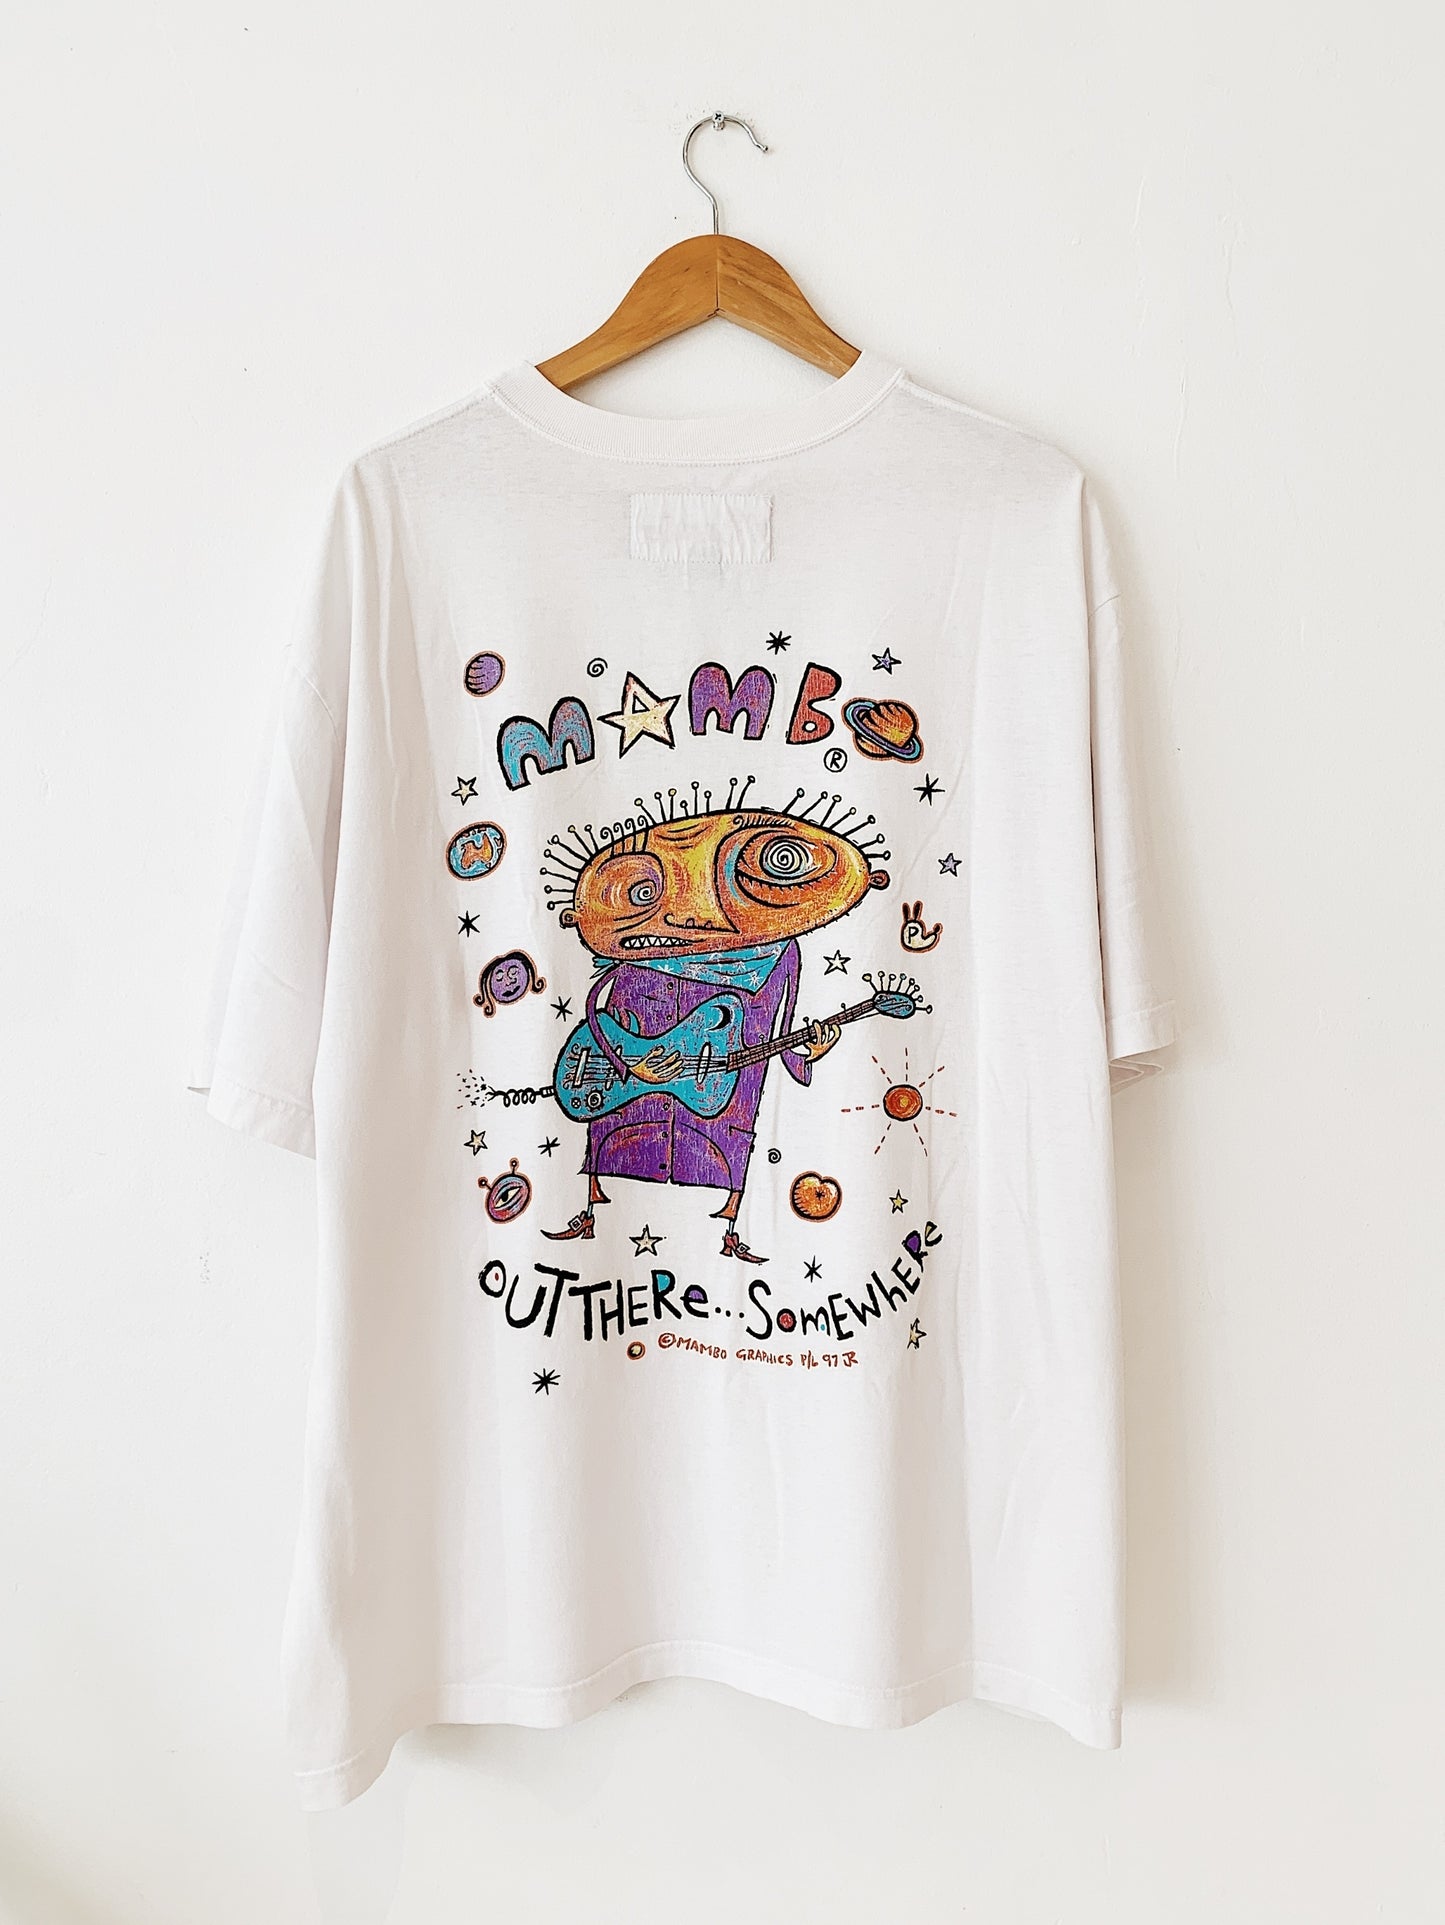 Vintage Jeff Raglus Mambo "Out There Somewhere" '97 T-Shirt